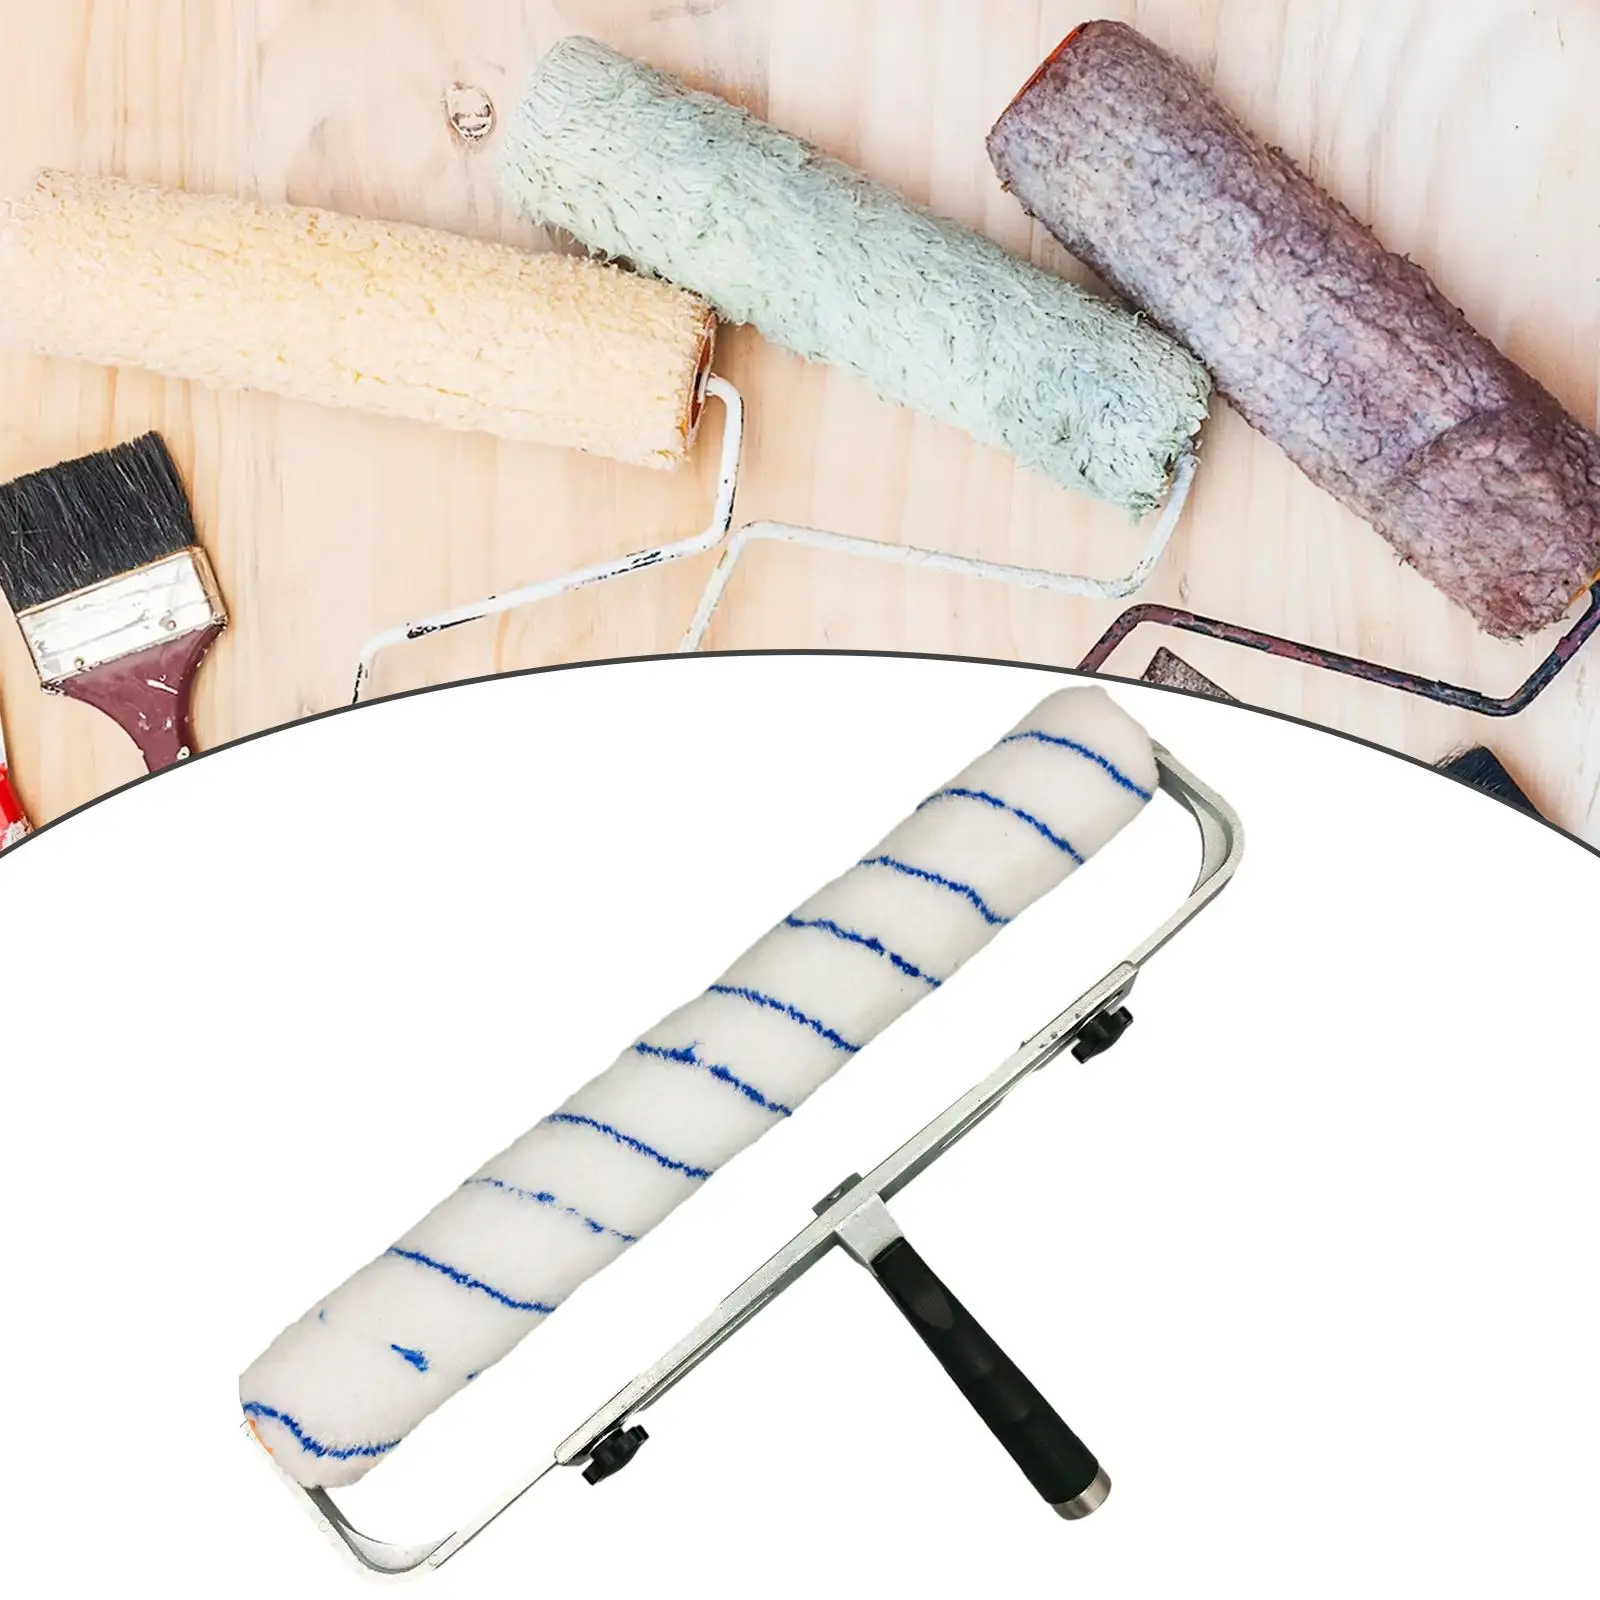 18inch Paint Roller and Cover Replacements Accessories for Home Decorating